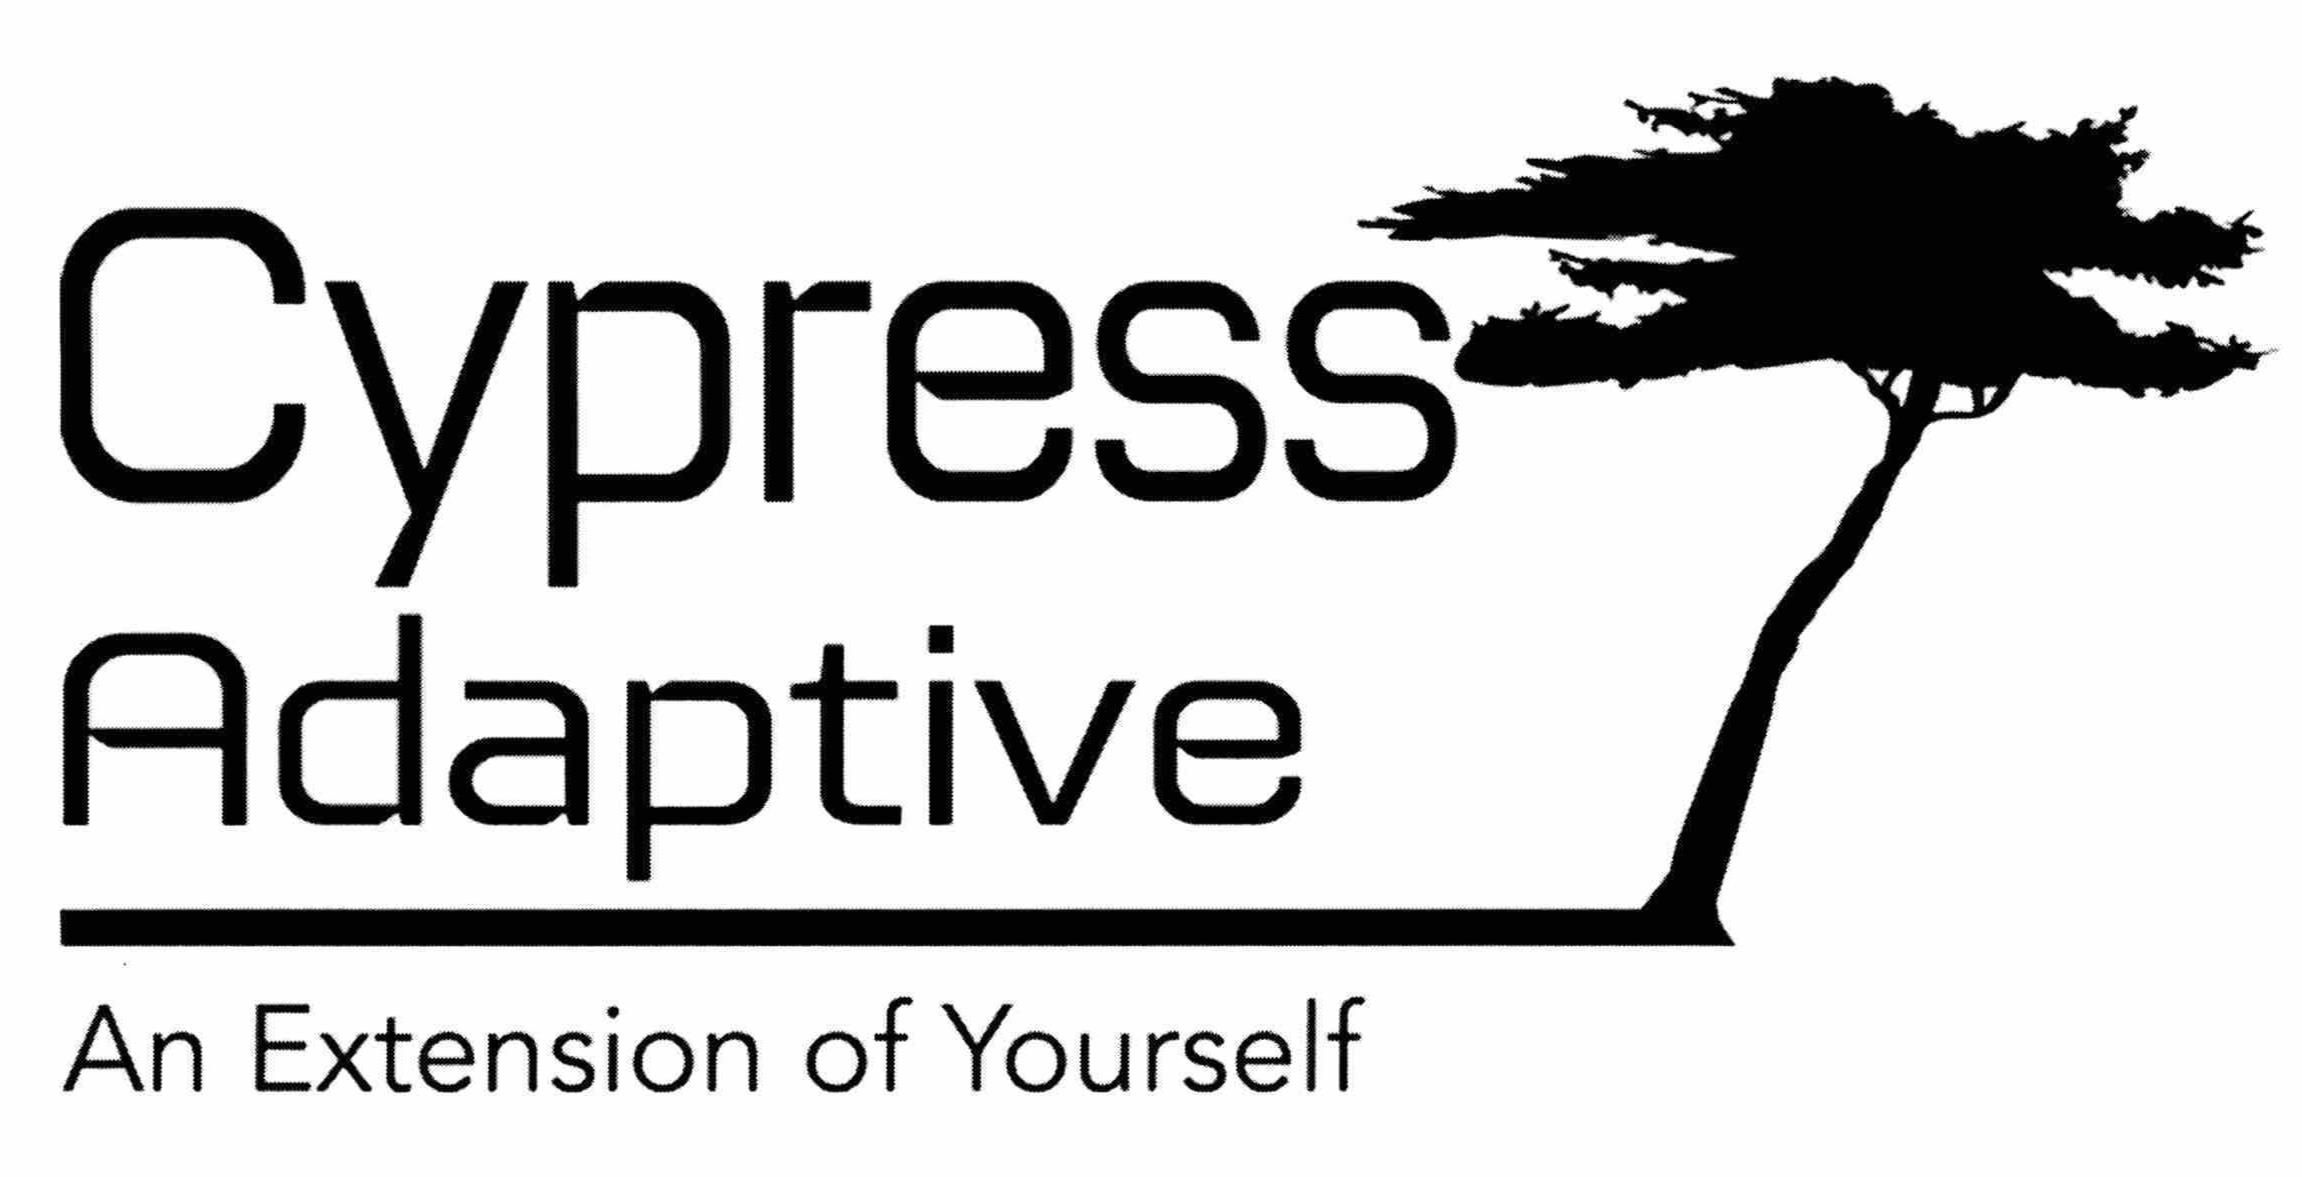  CYPRESS ADAPTIVE AN EXTENSION OF YOURSELF